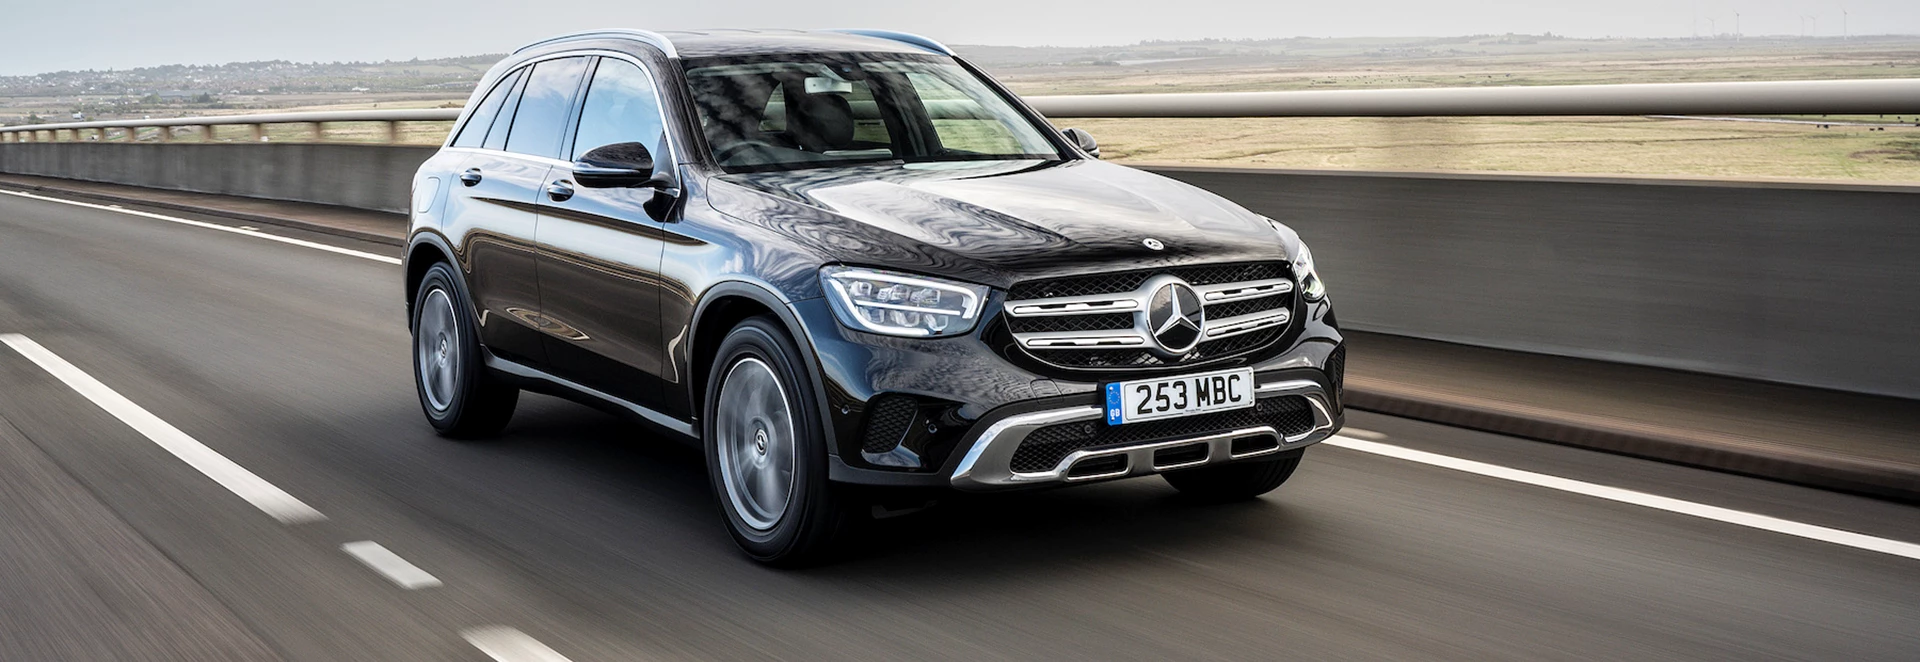 Buyer’s guide to the Mercedes GLC 